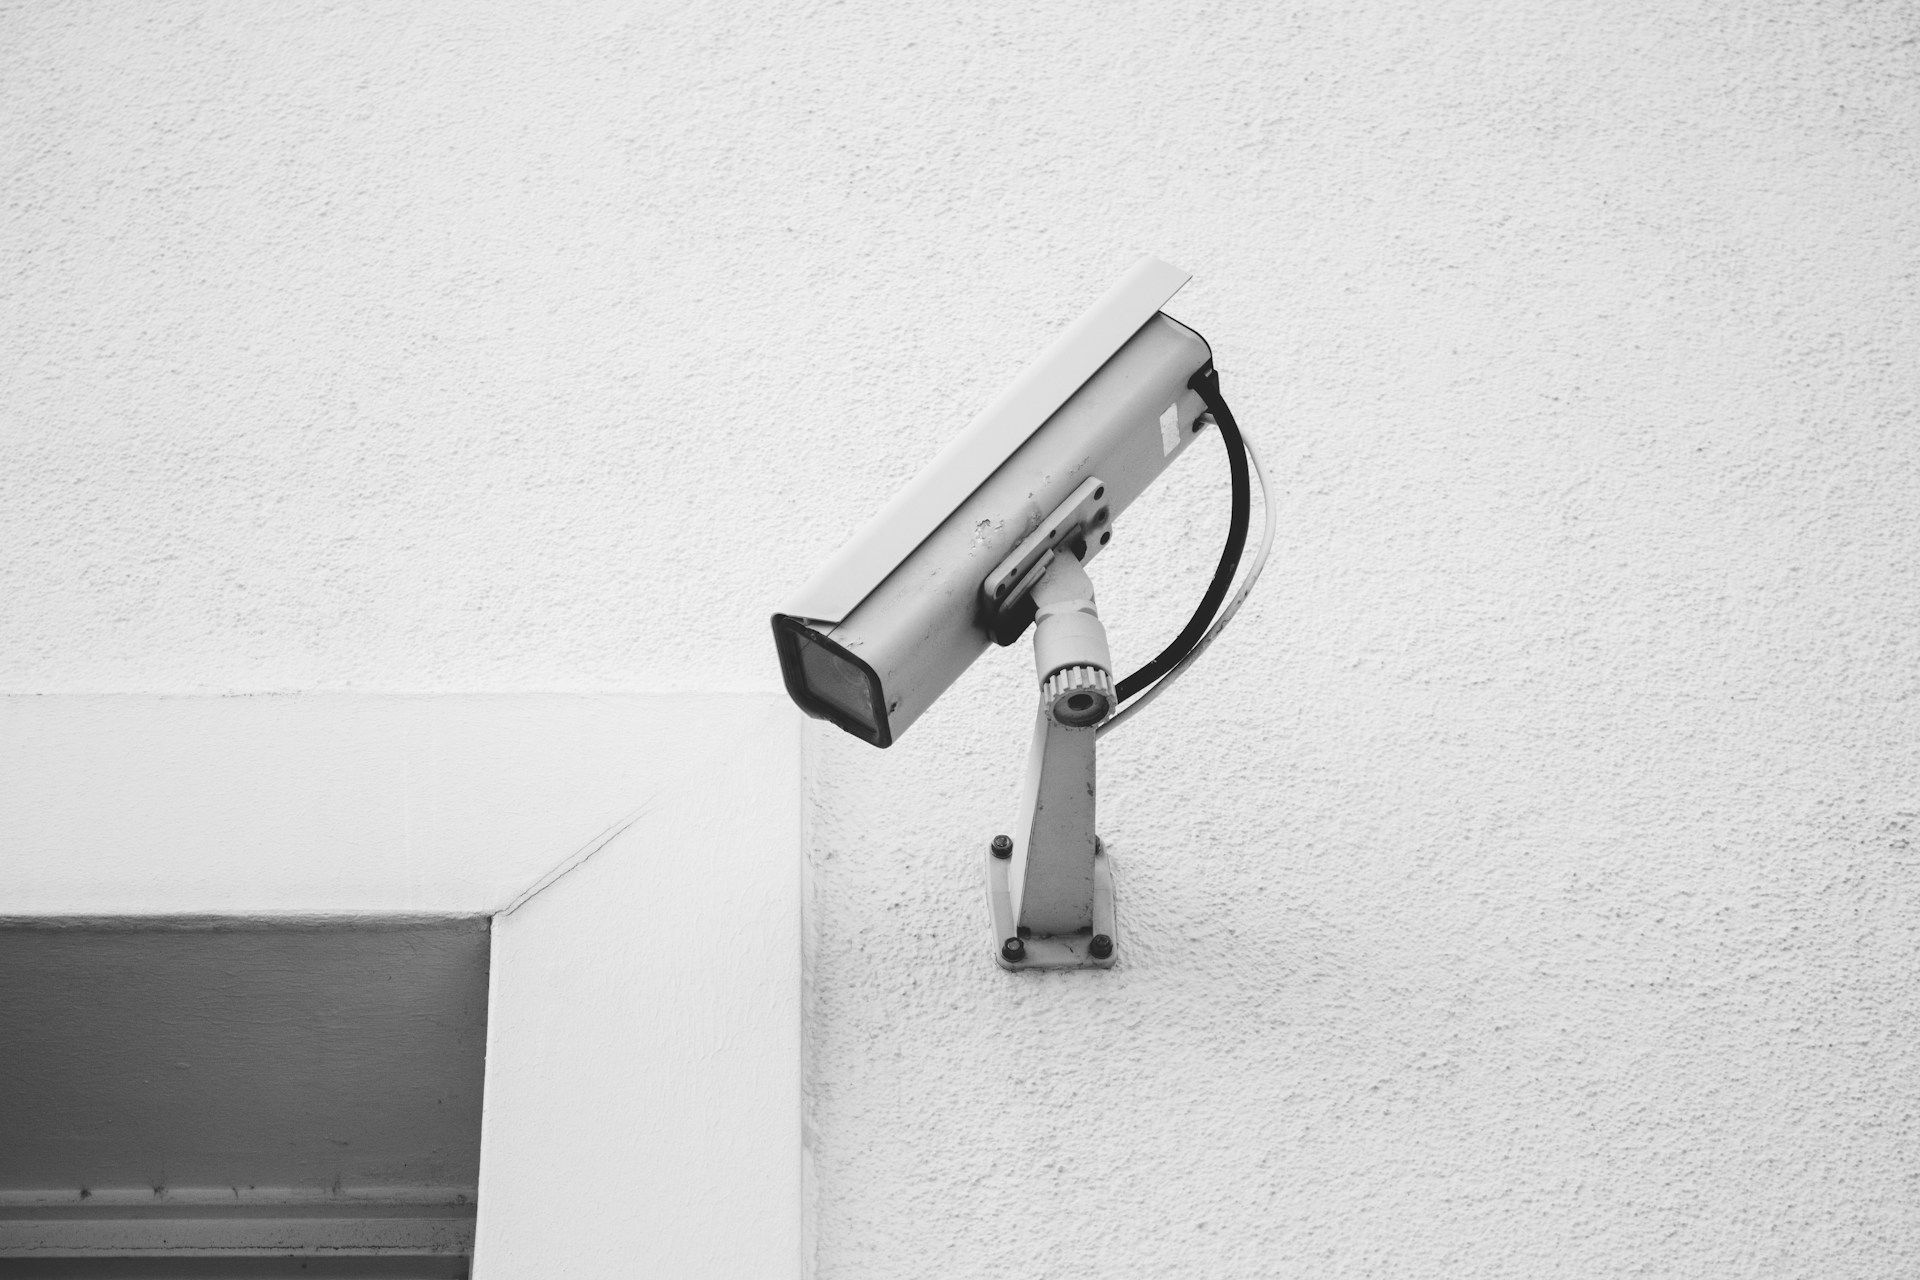 A CCTV camera attached to a white wall